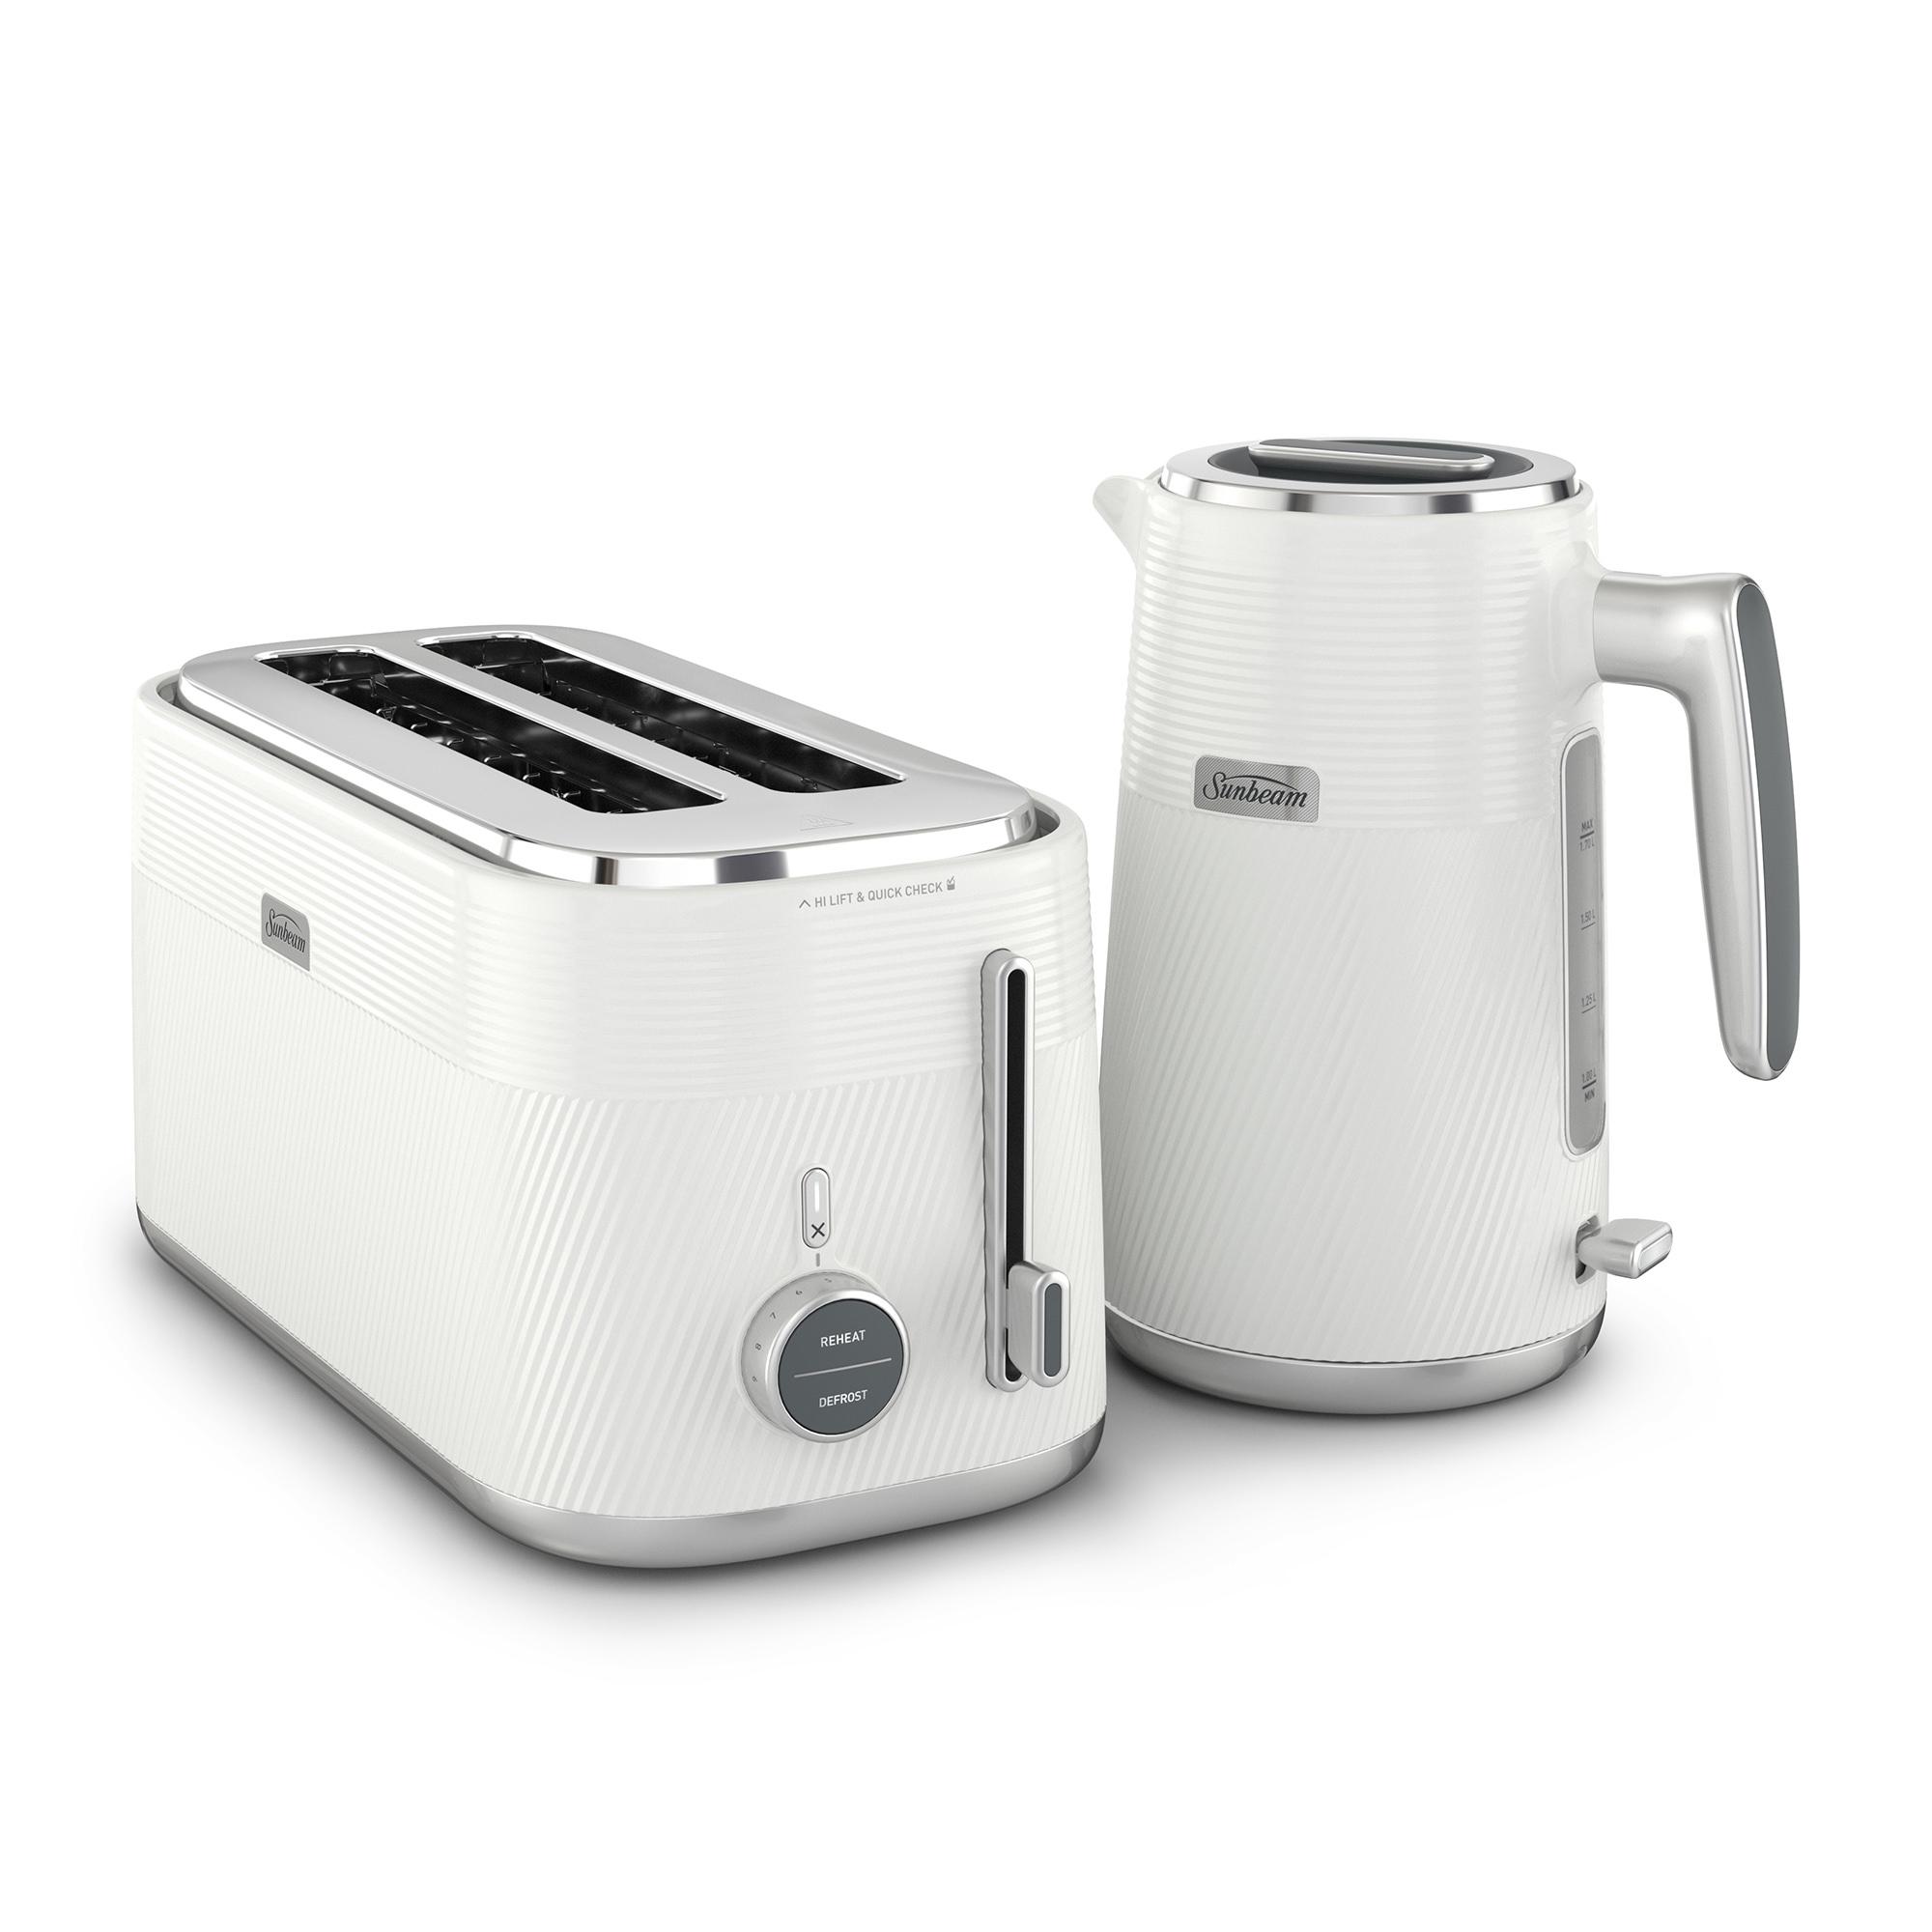 Sunbeam Obliq Collection KEP3007WH Electric Kettle 1.7L White Image 3